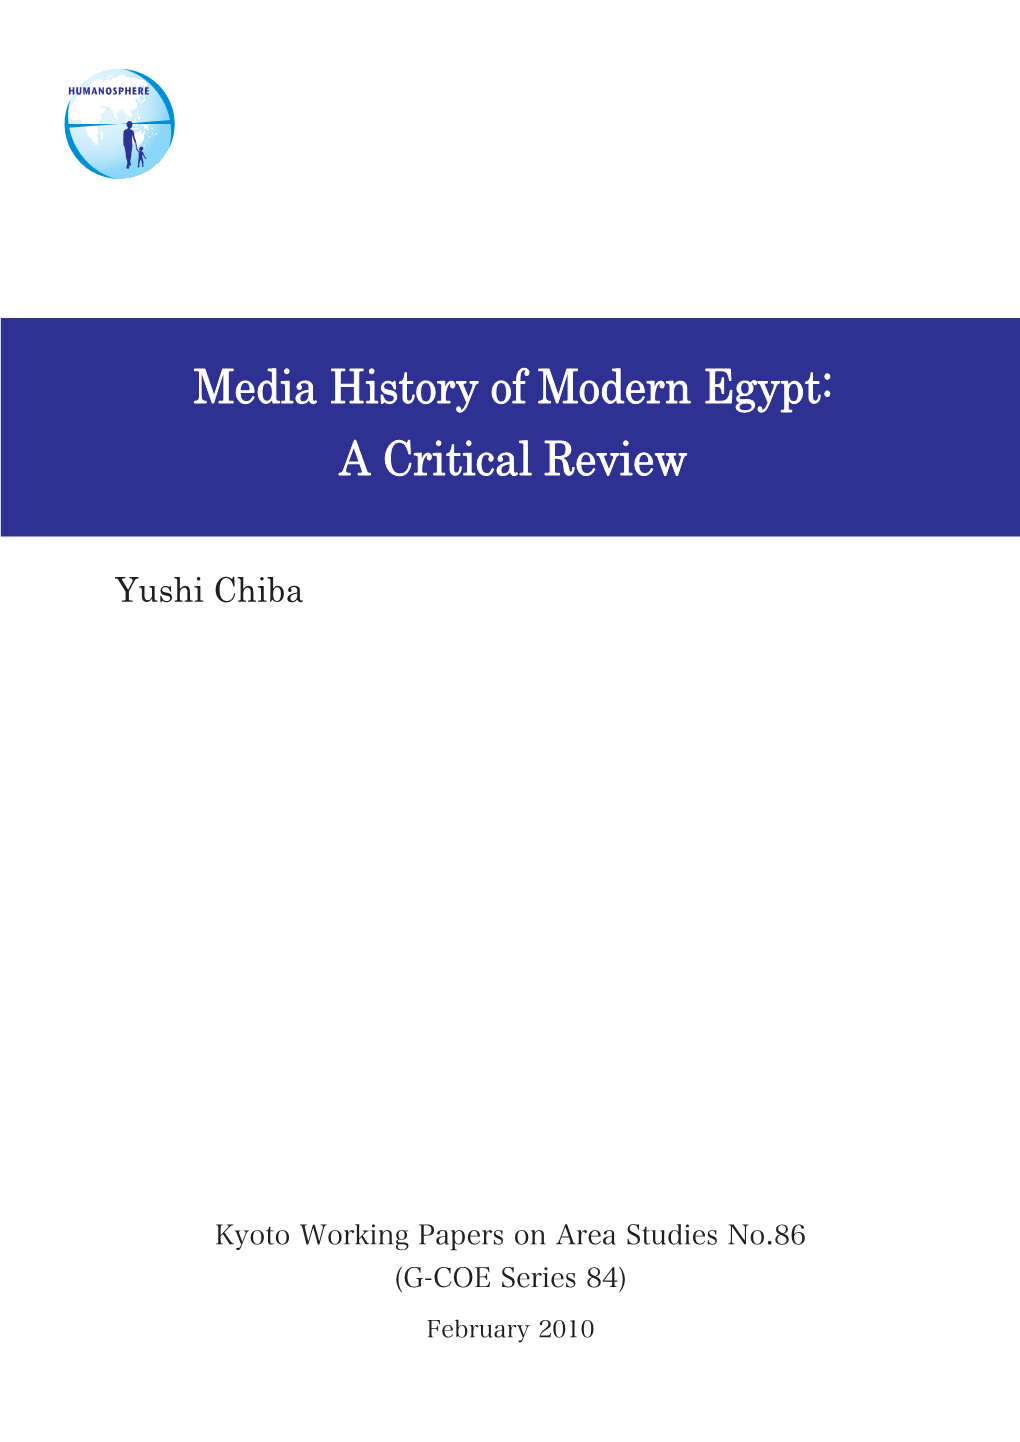 Transition of Mass Media in Contemporary Egypt